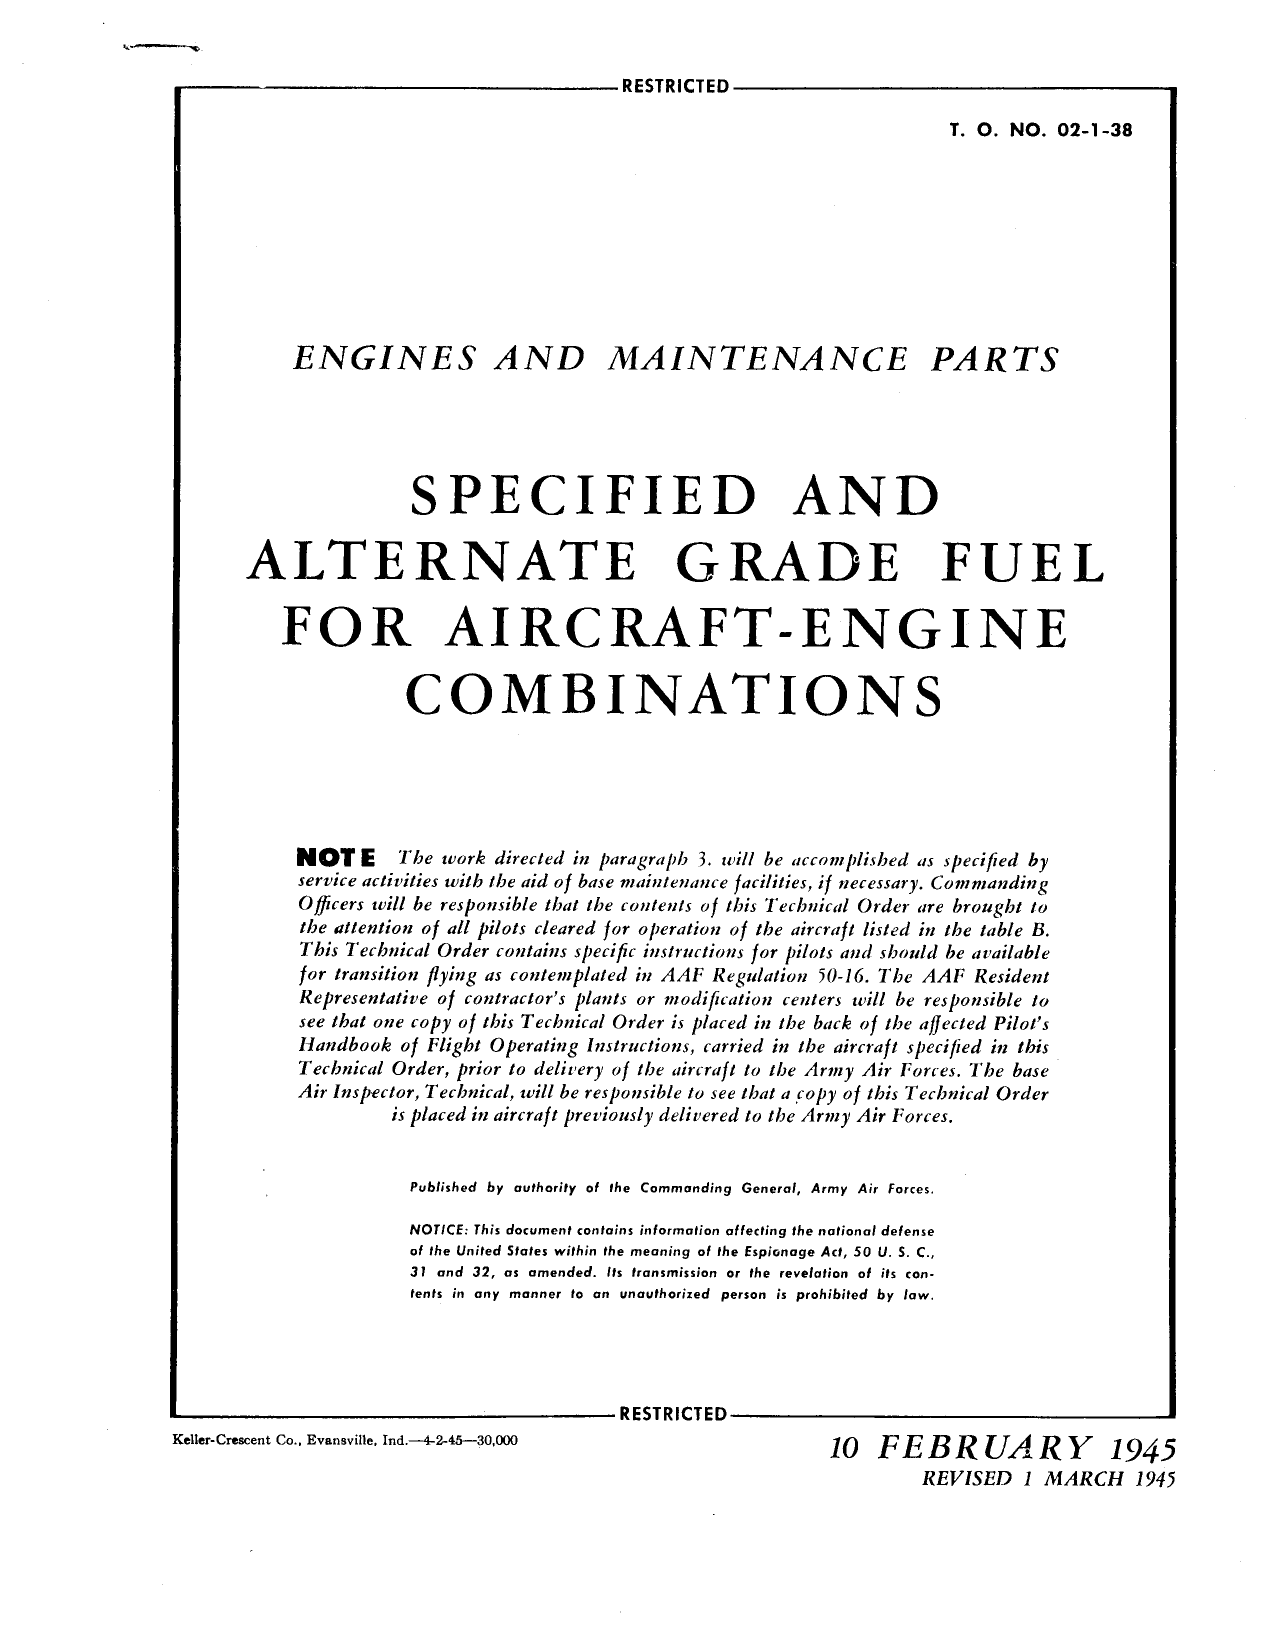 Sample page 1 from AirCorps Library document: Specified and Alternate Grade Fuel for Aircraft Engine Combinations